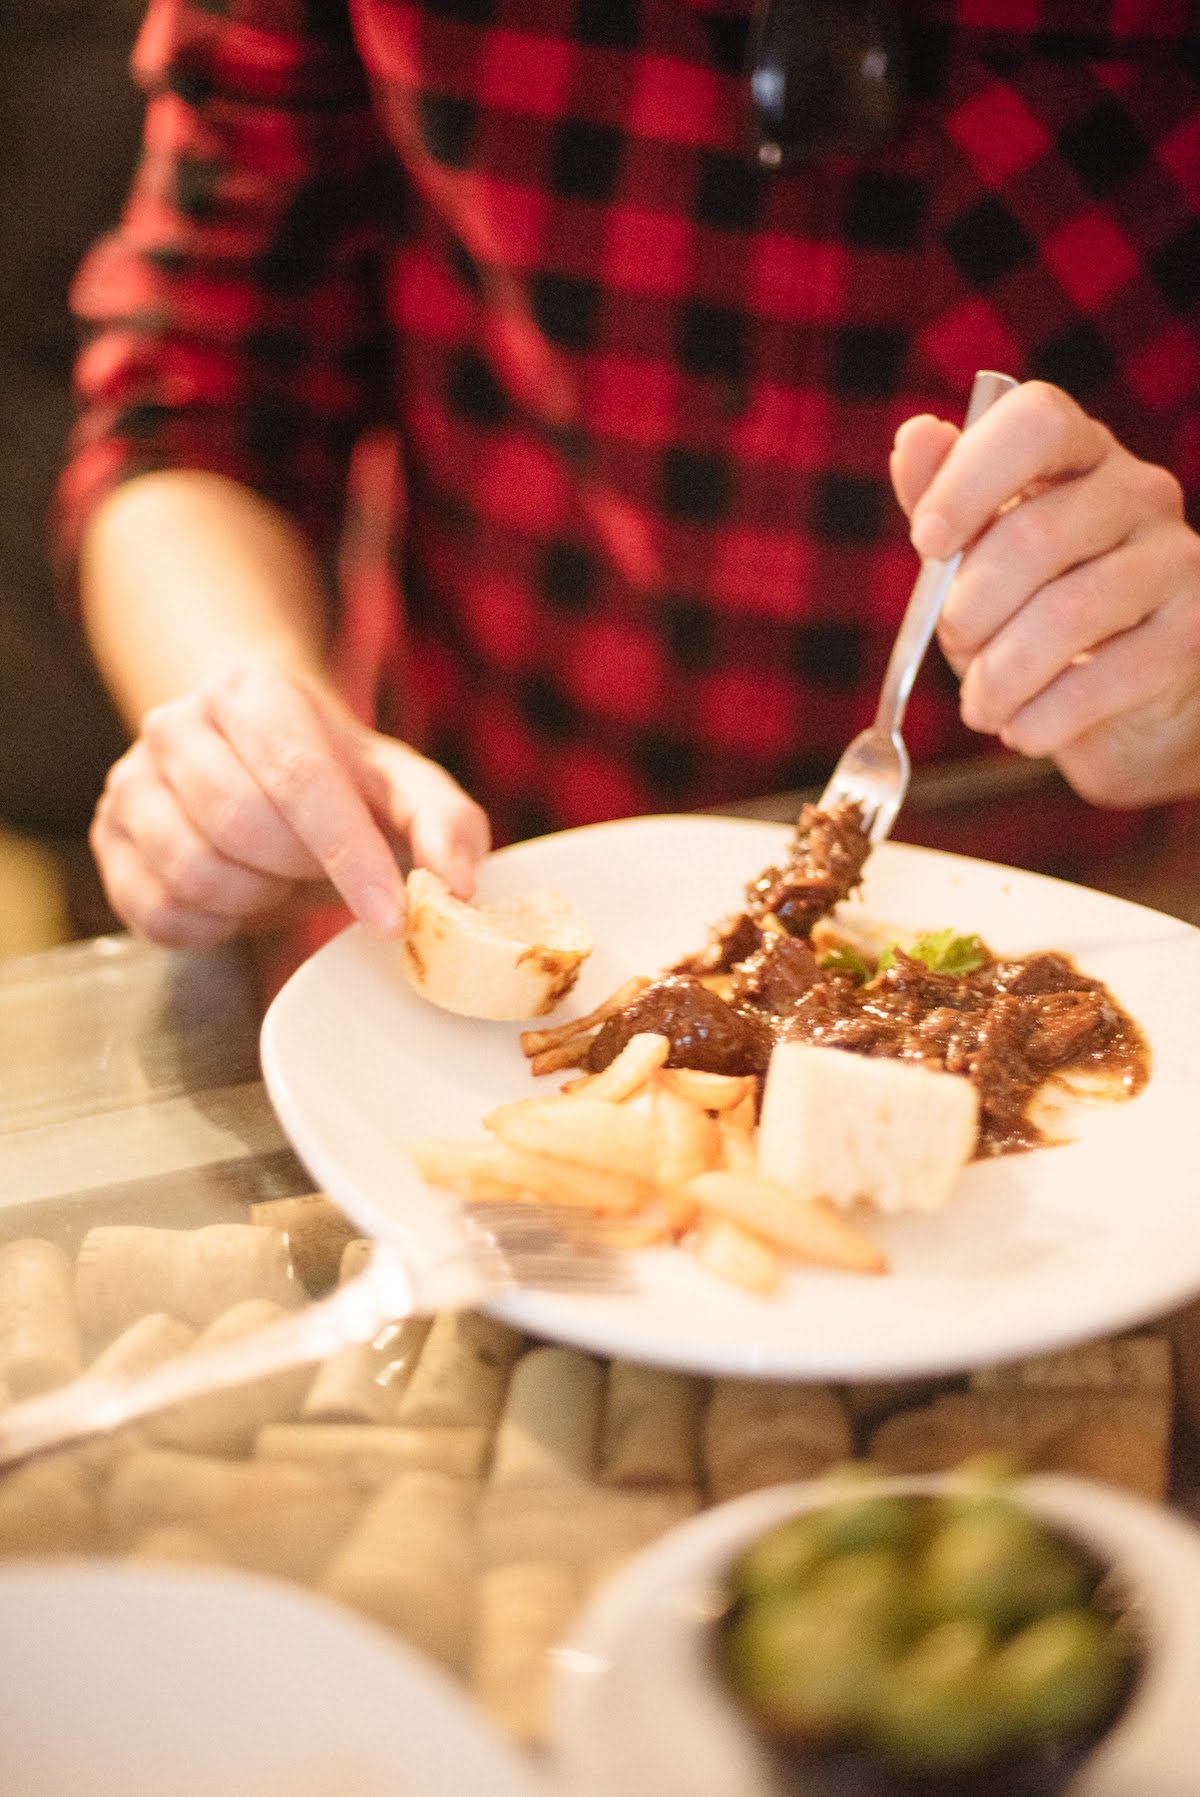 Close up of a person in a red shirt eating a meat dish while using a piece of bread to soak up the sauce.